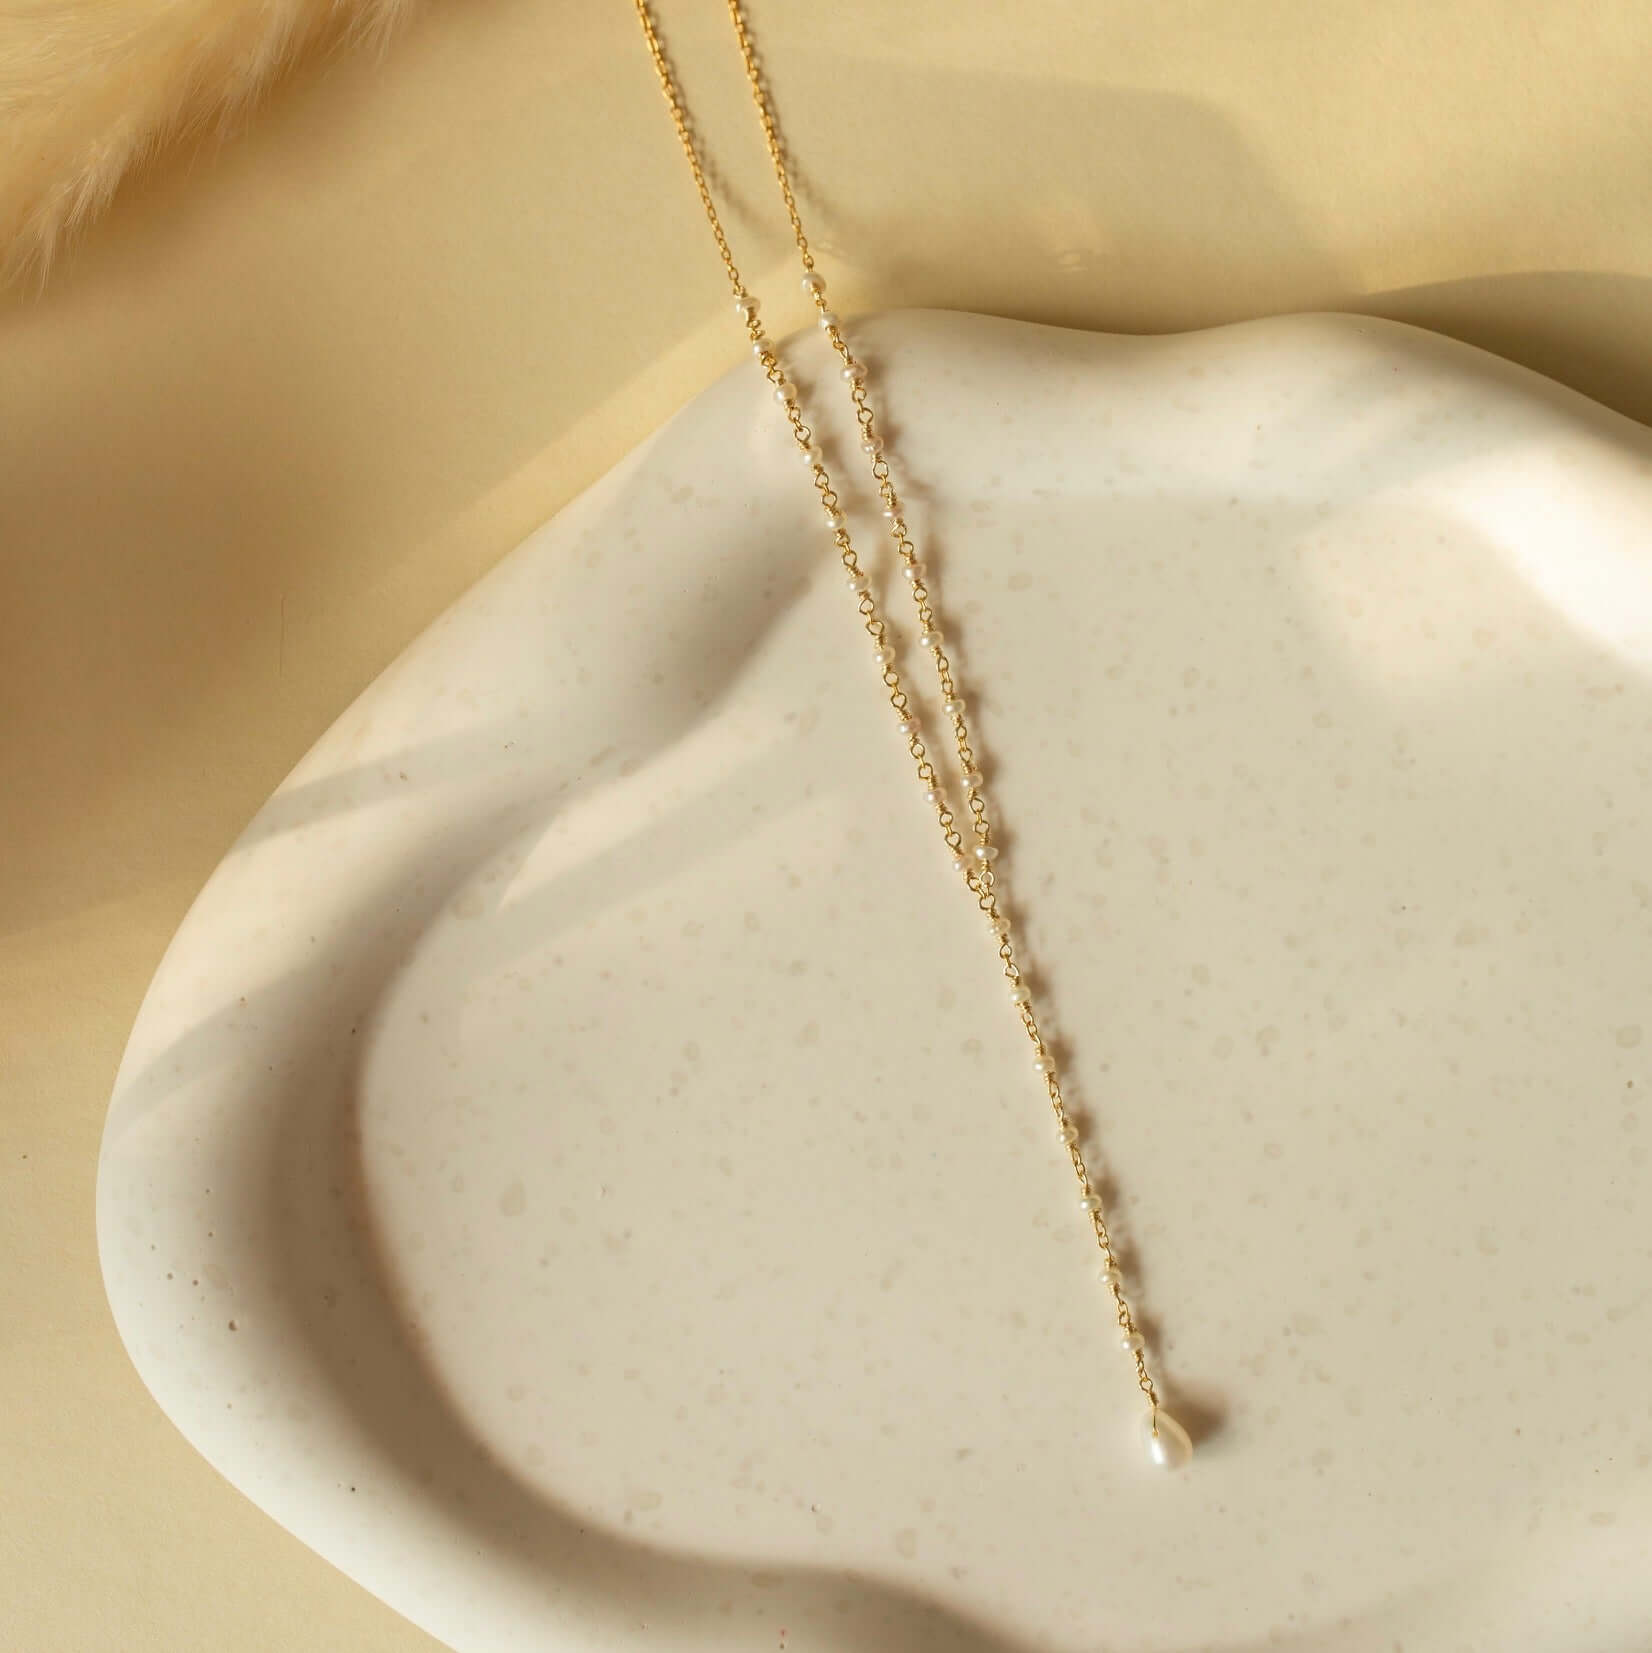 A delicate pearl necklace from The Kensington Collection gracefully rests on a rustic white clay plate